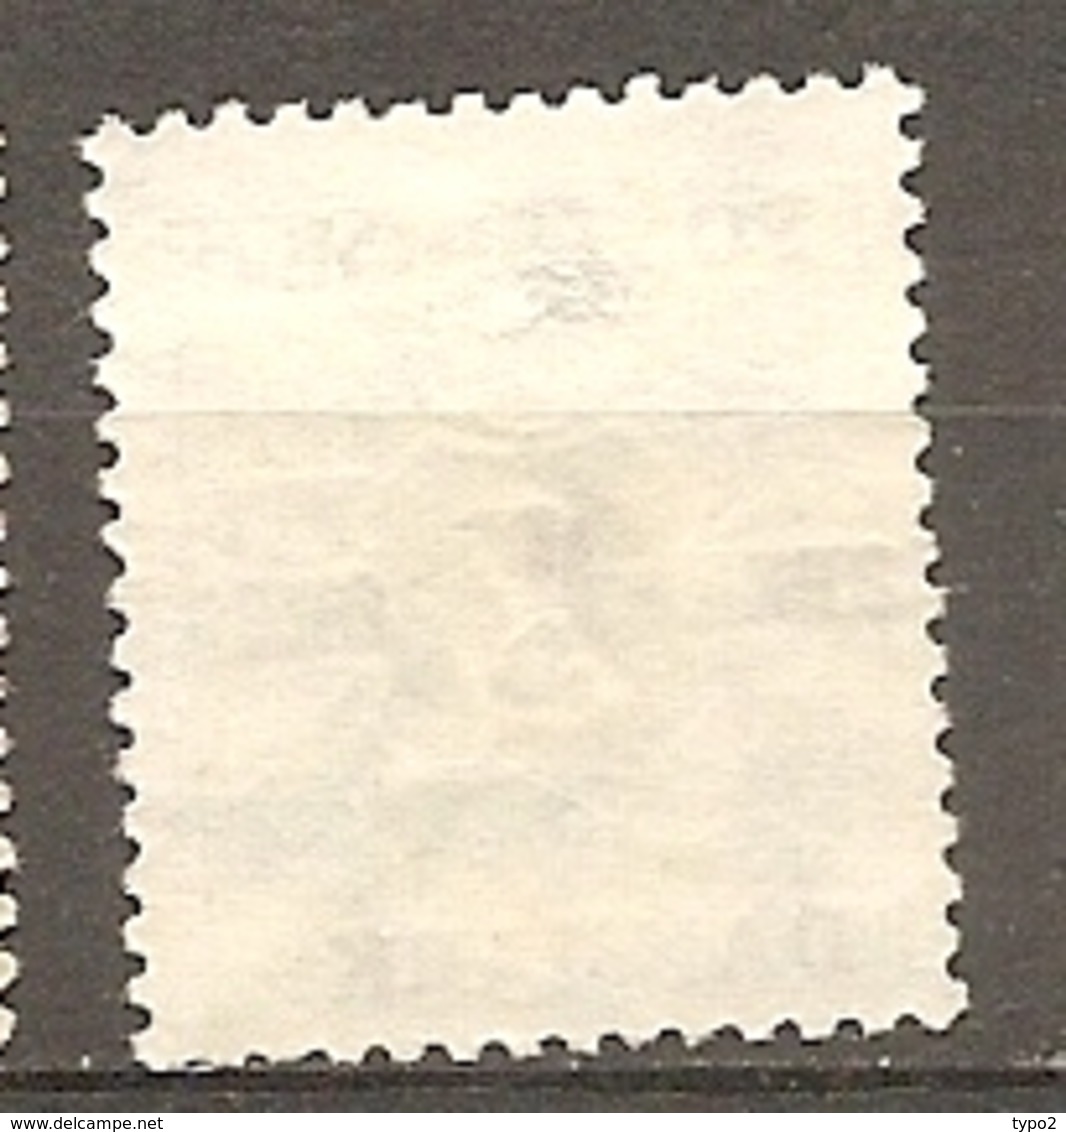 Yv. DK  N°  98  (*)  27o S 8o  Timbres Journaux 1915 Cote  5,25 Euro BE   2 Scans - Ungebraucht